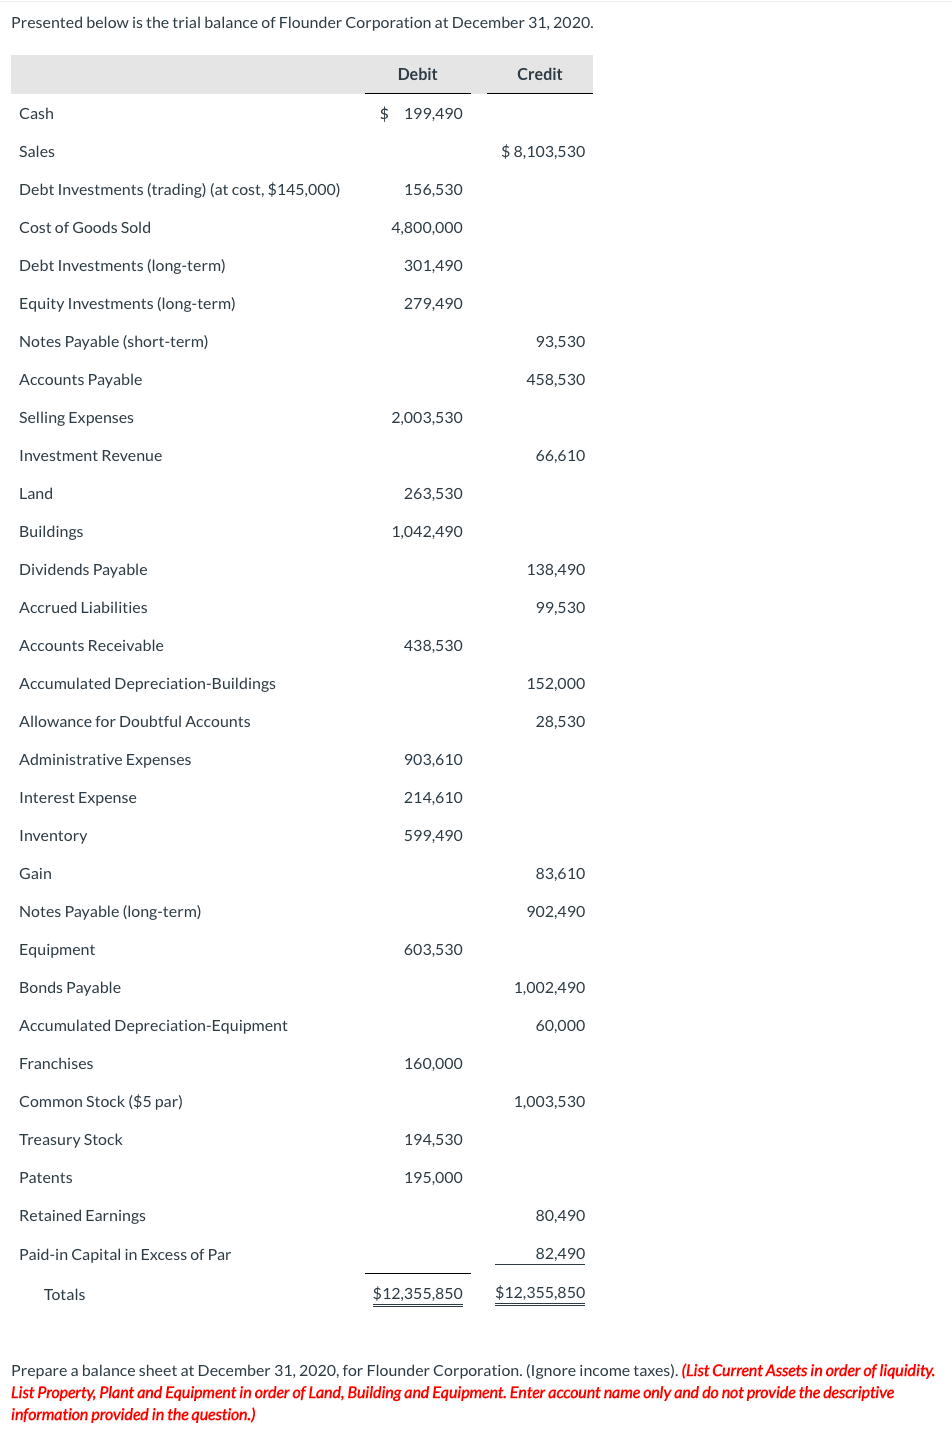 Presented below is the trial balance of Flounder Corporation at December 31, 2020.
Cash
Sales
Debt Investments (trading) (at cost, $145,000)
Cost of Goods Sold
Debt Investments (long-term)
Equity Investments (long-term)
Notes Payable (short-term)
Accounts Payable
Selling Expenses
Investment Revenue
Land
Buildings
Dividends Payable
Accrued Liabilities
Accounts Receivable
Accumulated Depreciation-Buildings
Allowance for Doubtful Accounts
Administrative Expenses
Interest Expense
Inventory
Gain
Notes Payable (long-term)
Equipment
Bonds Payable
Accumulated Depreciation-Equipment
Franchises
Common Stock ($5 par)
Treasury Stock
Patents
Retained Earnings
Paid-in Capital in Excess of Par
Totals
Debit
$ 199,490
156,530
4,800,000
301,490
279,490
2,003,530
263,530
1,042,490
438,530
903,610
214,610
599,490
603,530
160,000
194,530
195,000
$12,355,850
Credit
$ 8,103,530
93,530
458,530
66,610
138,490
99,530
152,000
28,530
83,610
902,490
1,002,490
60,000
1,003,530
80,490
82,490
$12,355,850
Prepare a balance sheet at December 31, 2020, for Flounder Corporation. (Ignore income taxes). (List Current Assets in order of liquidity.
List Property, Plant and Equipment in order of Land, Building and Equipment. Enter account name only and do not provide the descriptive
information provided in the question.)